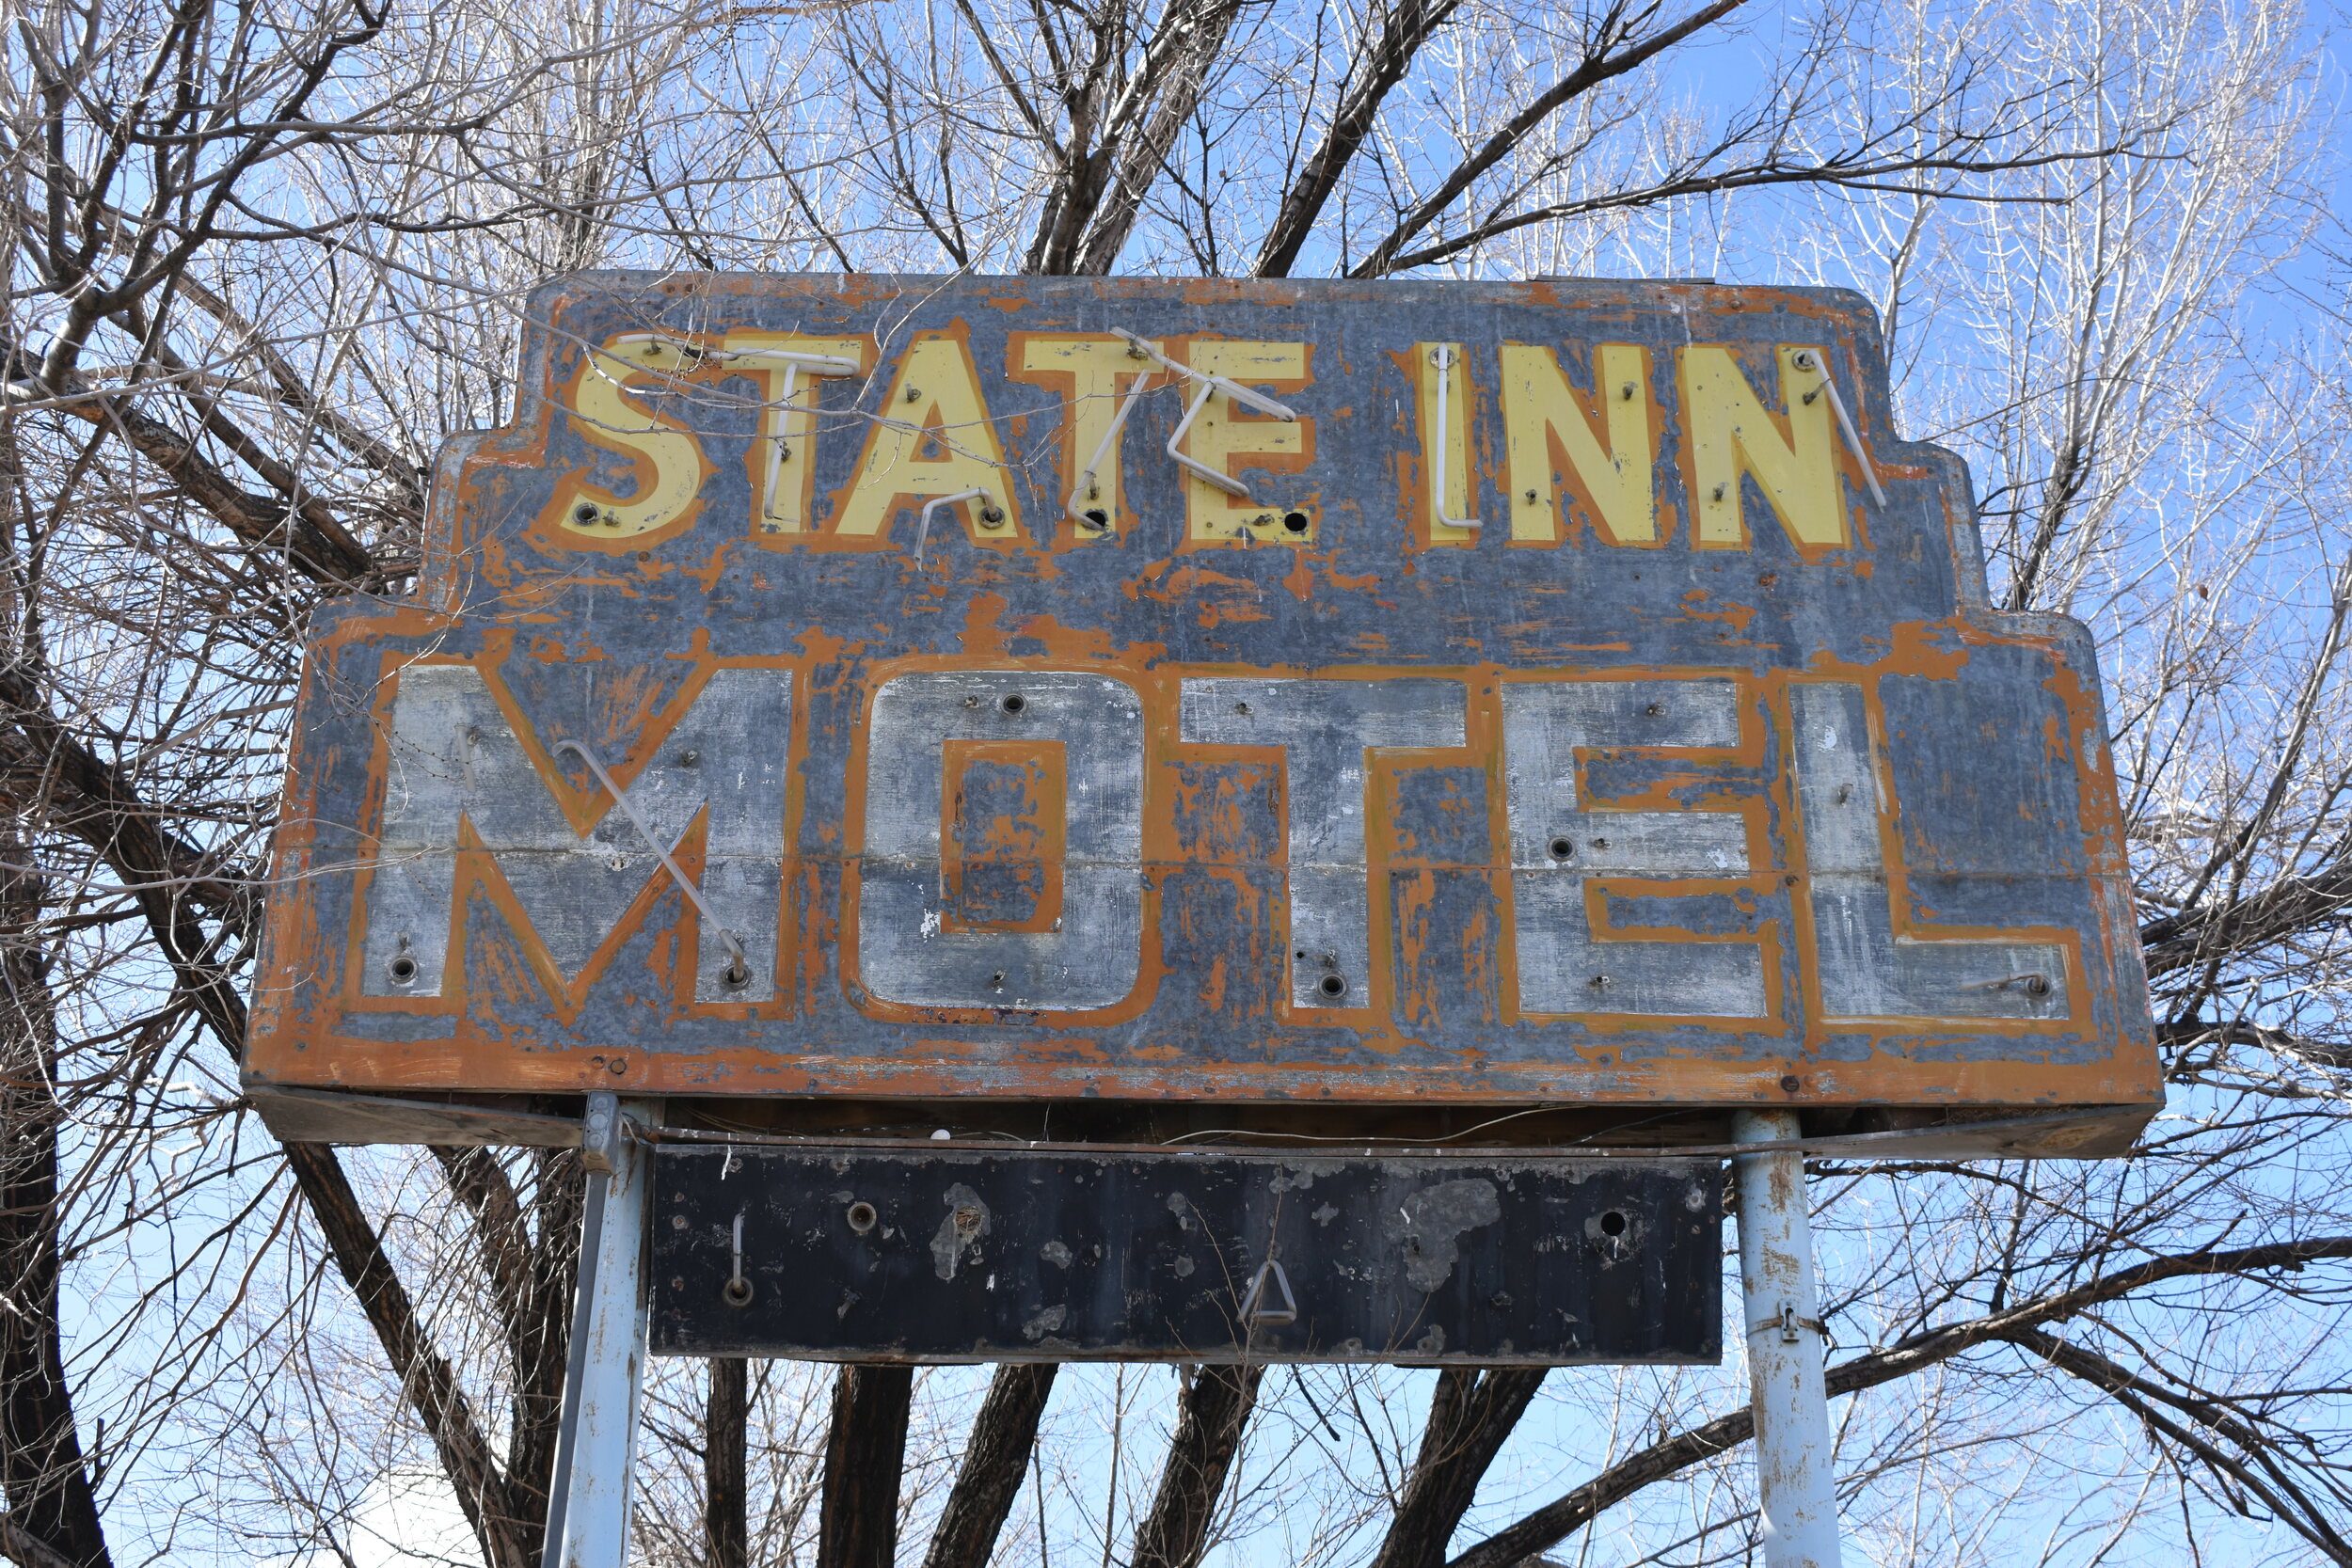 State Inn Motel double mounted sign, Carlin, Nevada